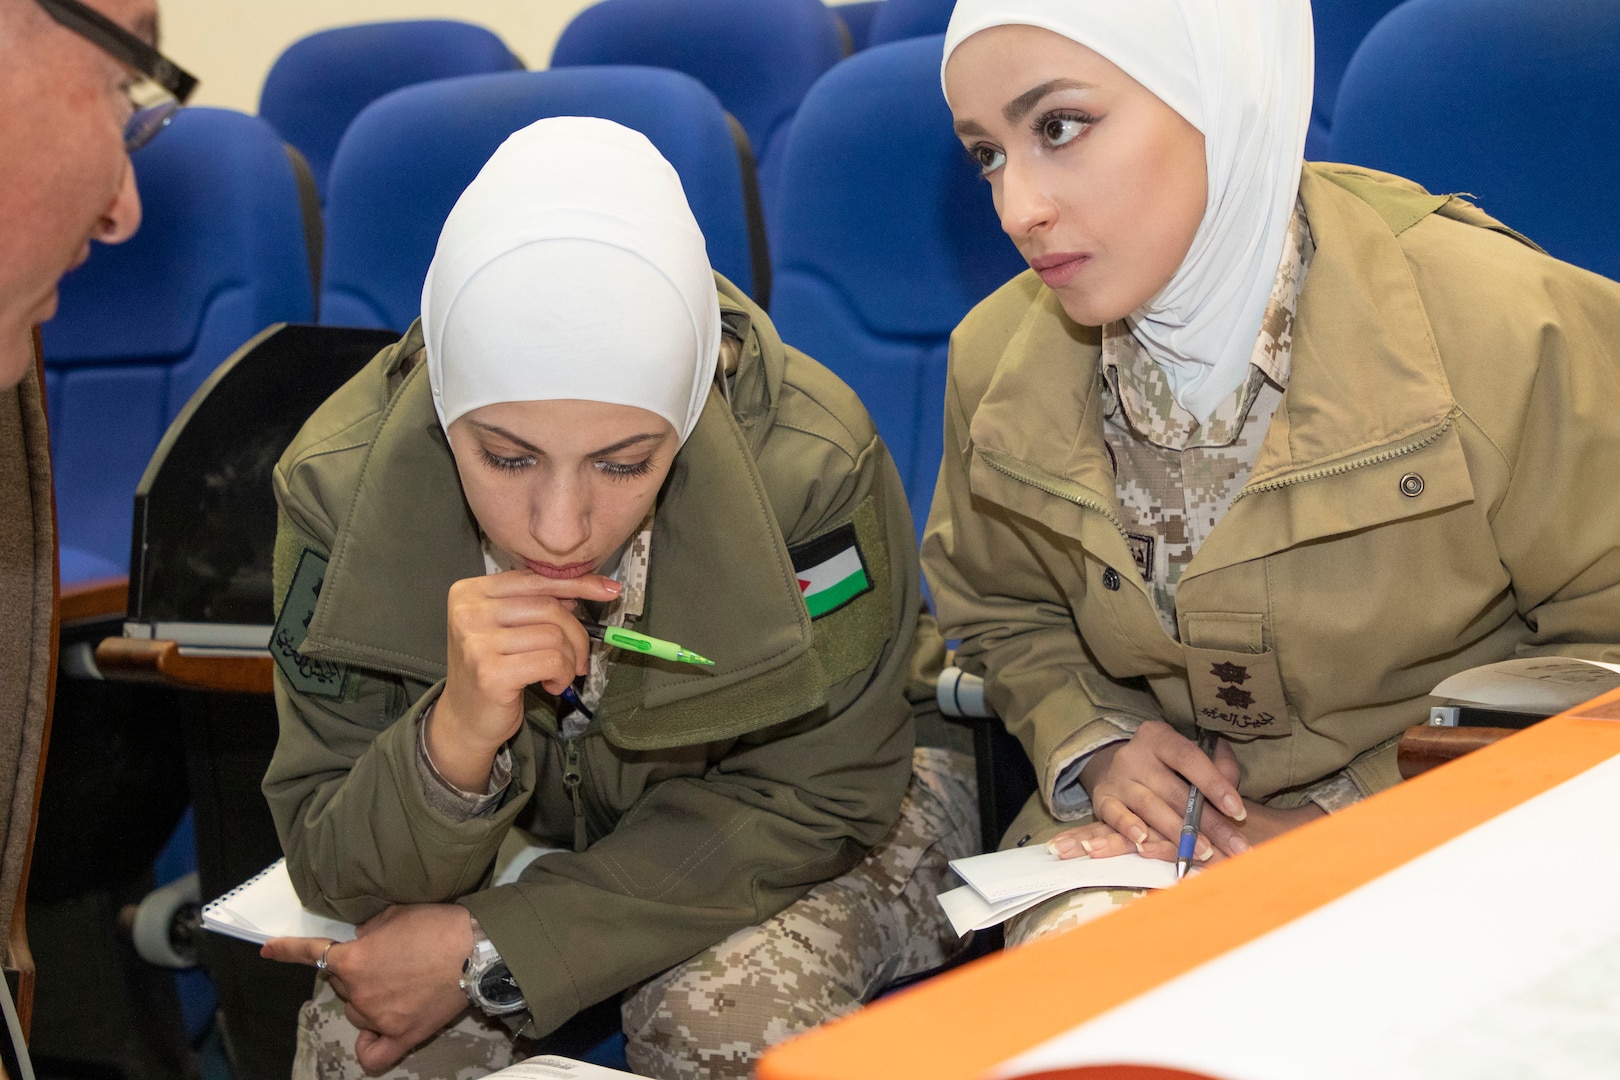 A U.S. Army Soldier, with Military Engagement Team-Jordan, 158th Maneuver Enhancement Brigade, Arizona Army National Guard, discusses map azimuths with Jordan Armed Forces-Arab Army (JAF) Quick Reaction Force Female Engagement Team Soldiers during a Map Reading Subject Matter Expert Exchange at a base outside Amman, Jordan Jan. 13, 2020. The United States is committed to the security of Jordan and to partnering closely with the JAF to meet common security challenges.